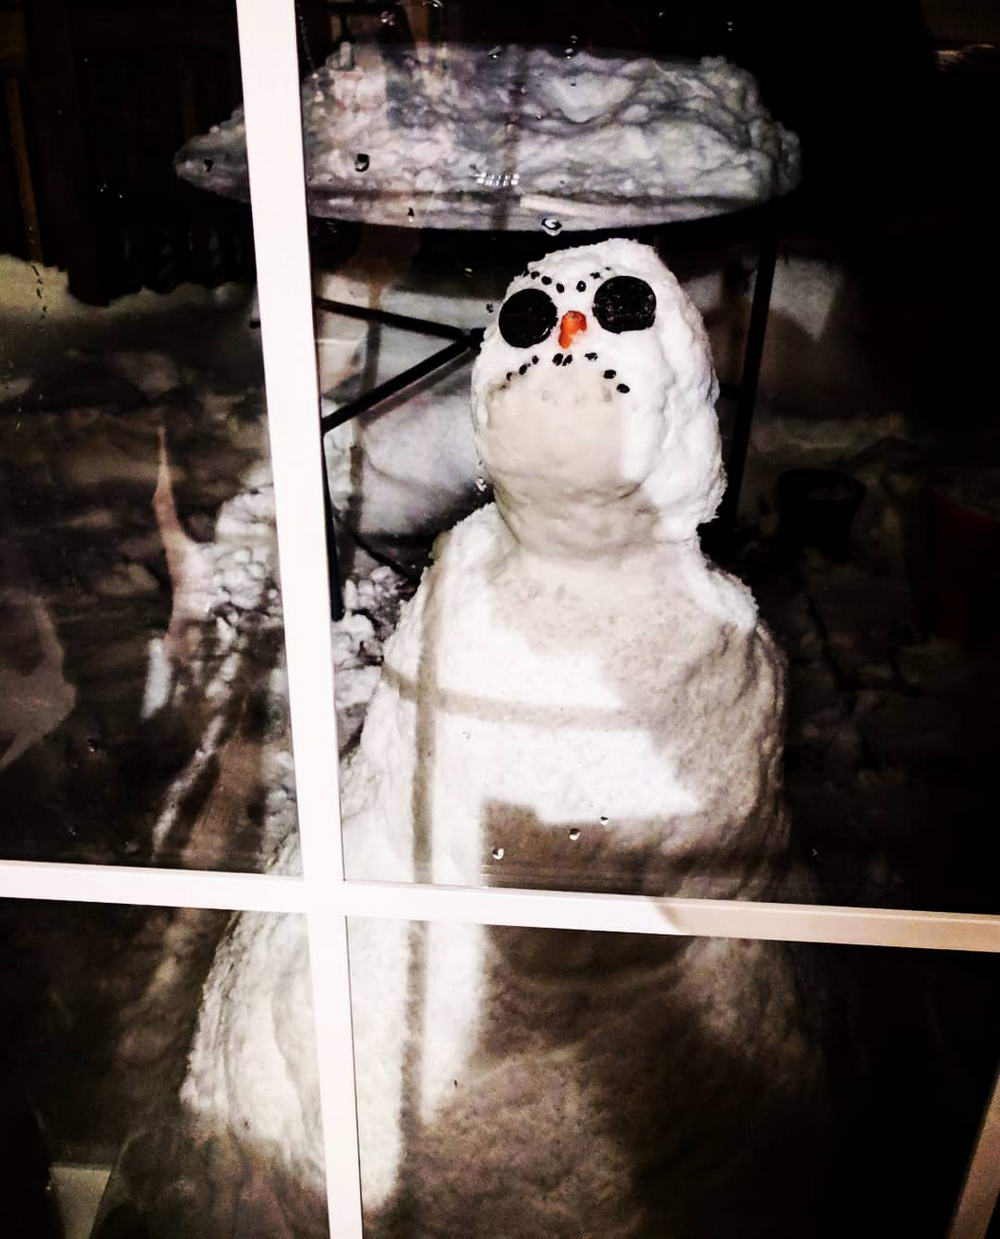 wtf images - angry snowman looking ready to beat you up